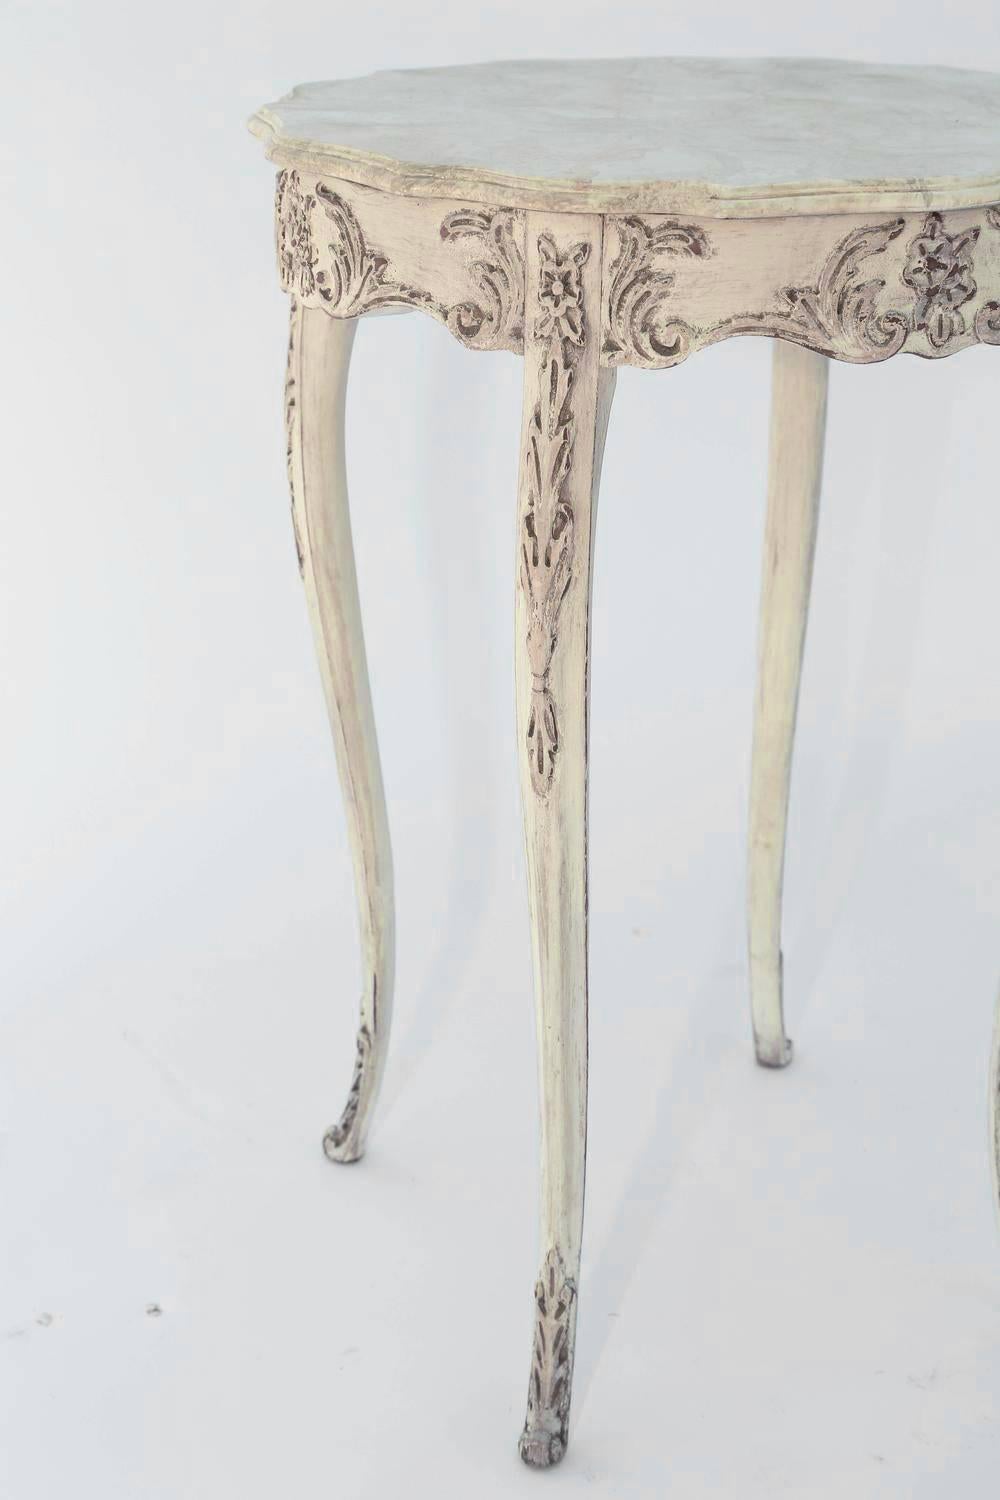 Table, having a round molded top with serpentine edge in faux mabre, on foliate-carved, scalloped apron, raised on delicate cabriole legs, each with festooned knees and feet. 

Stock ID: 6158.